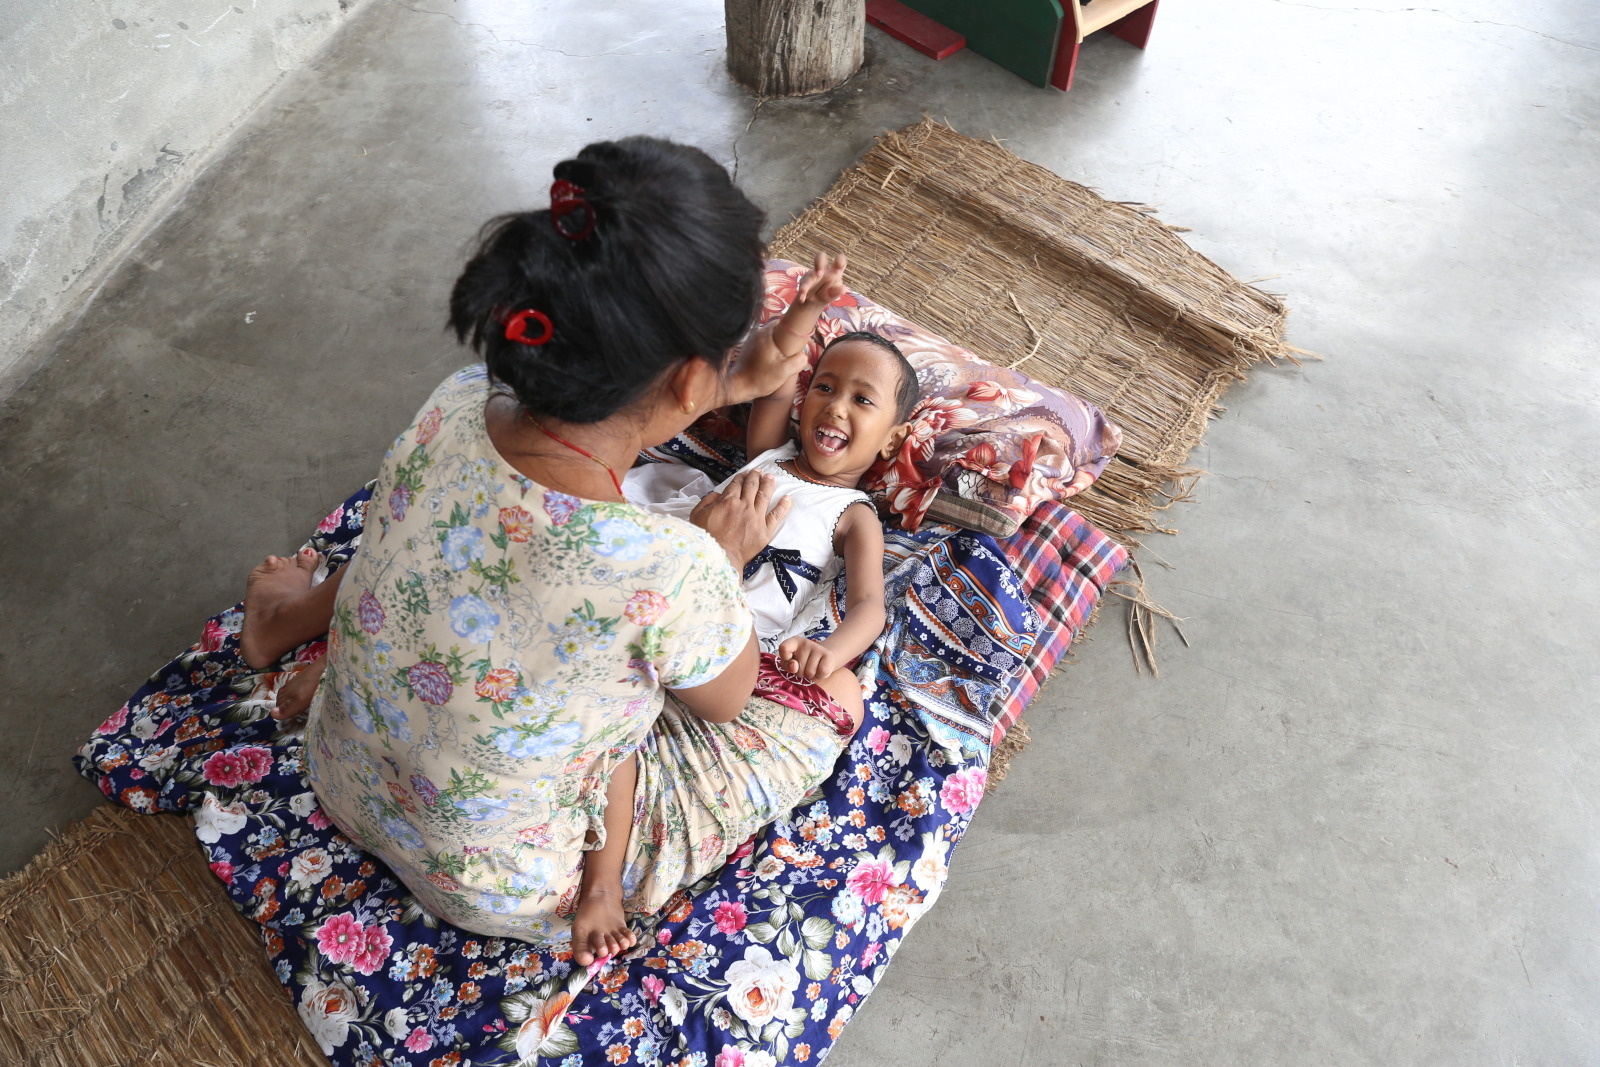 A young girl lies on a blanket while her mother helps raise her arm above her head.